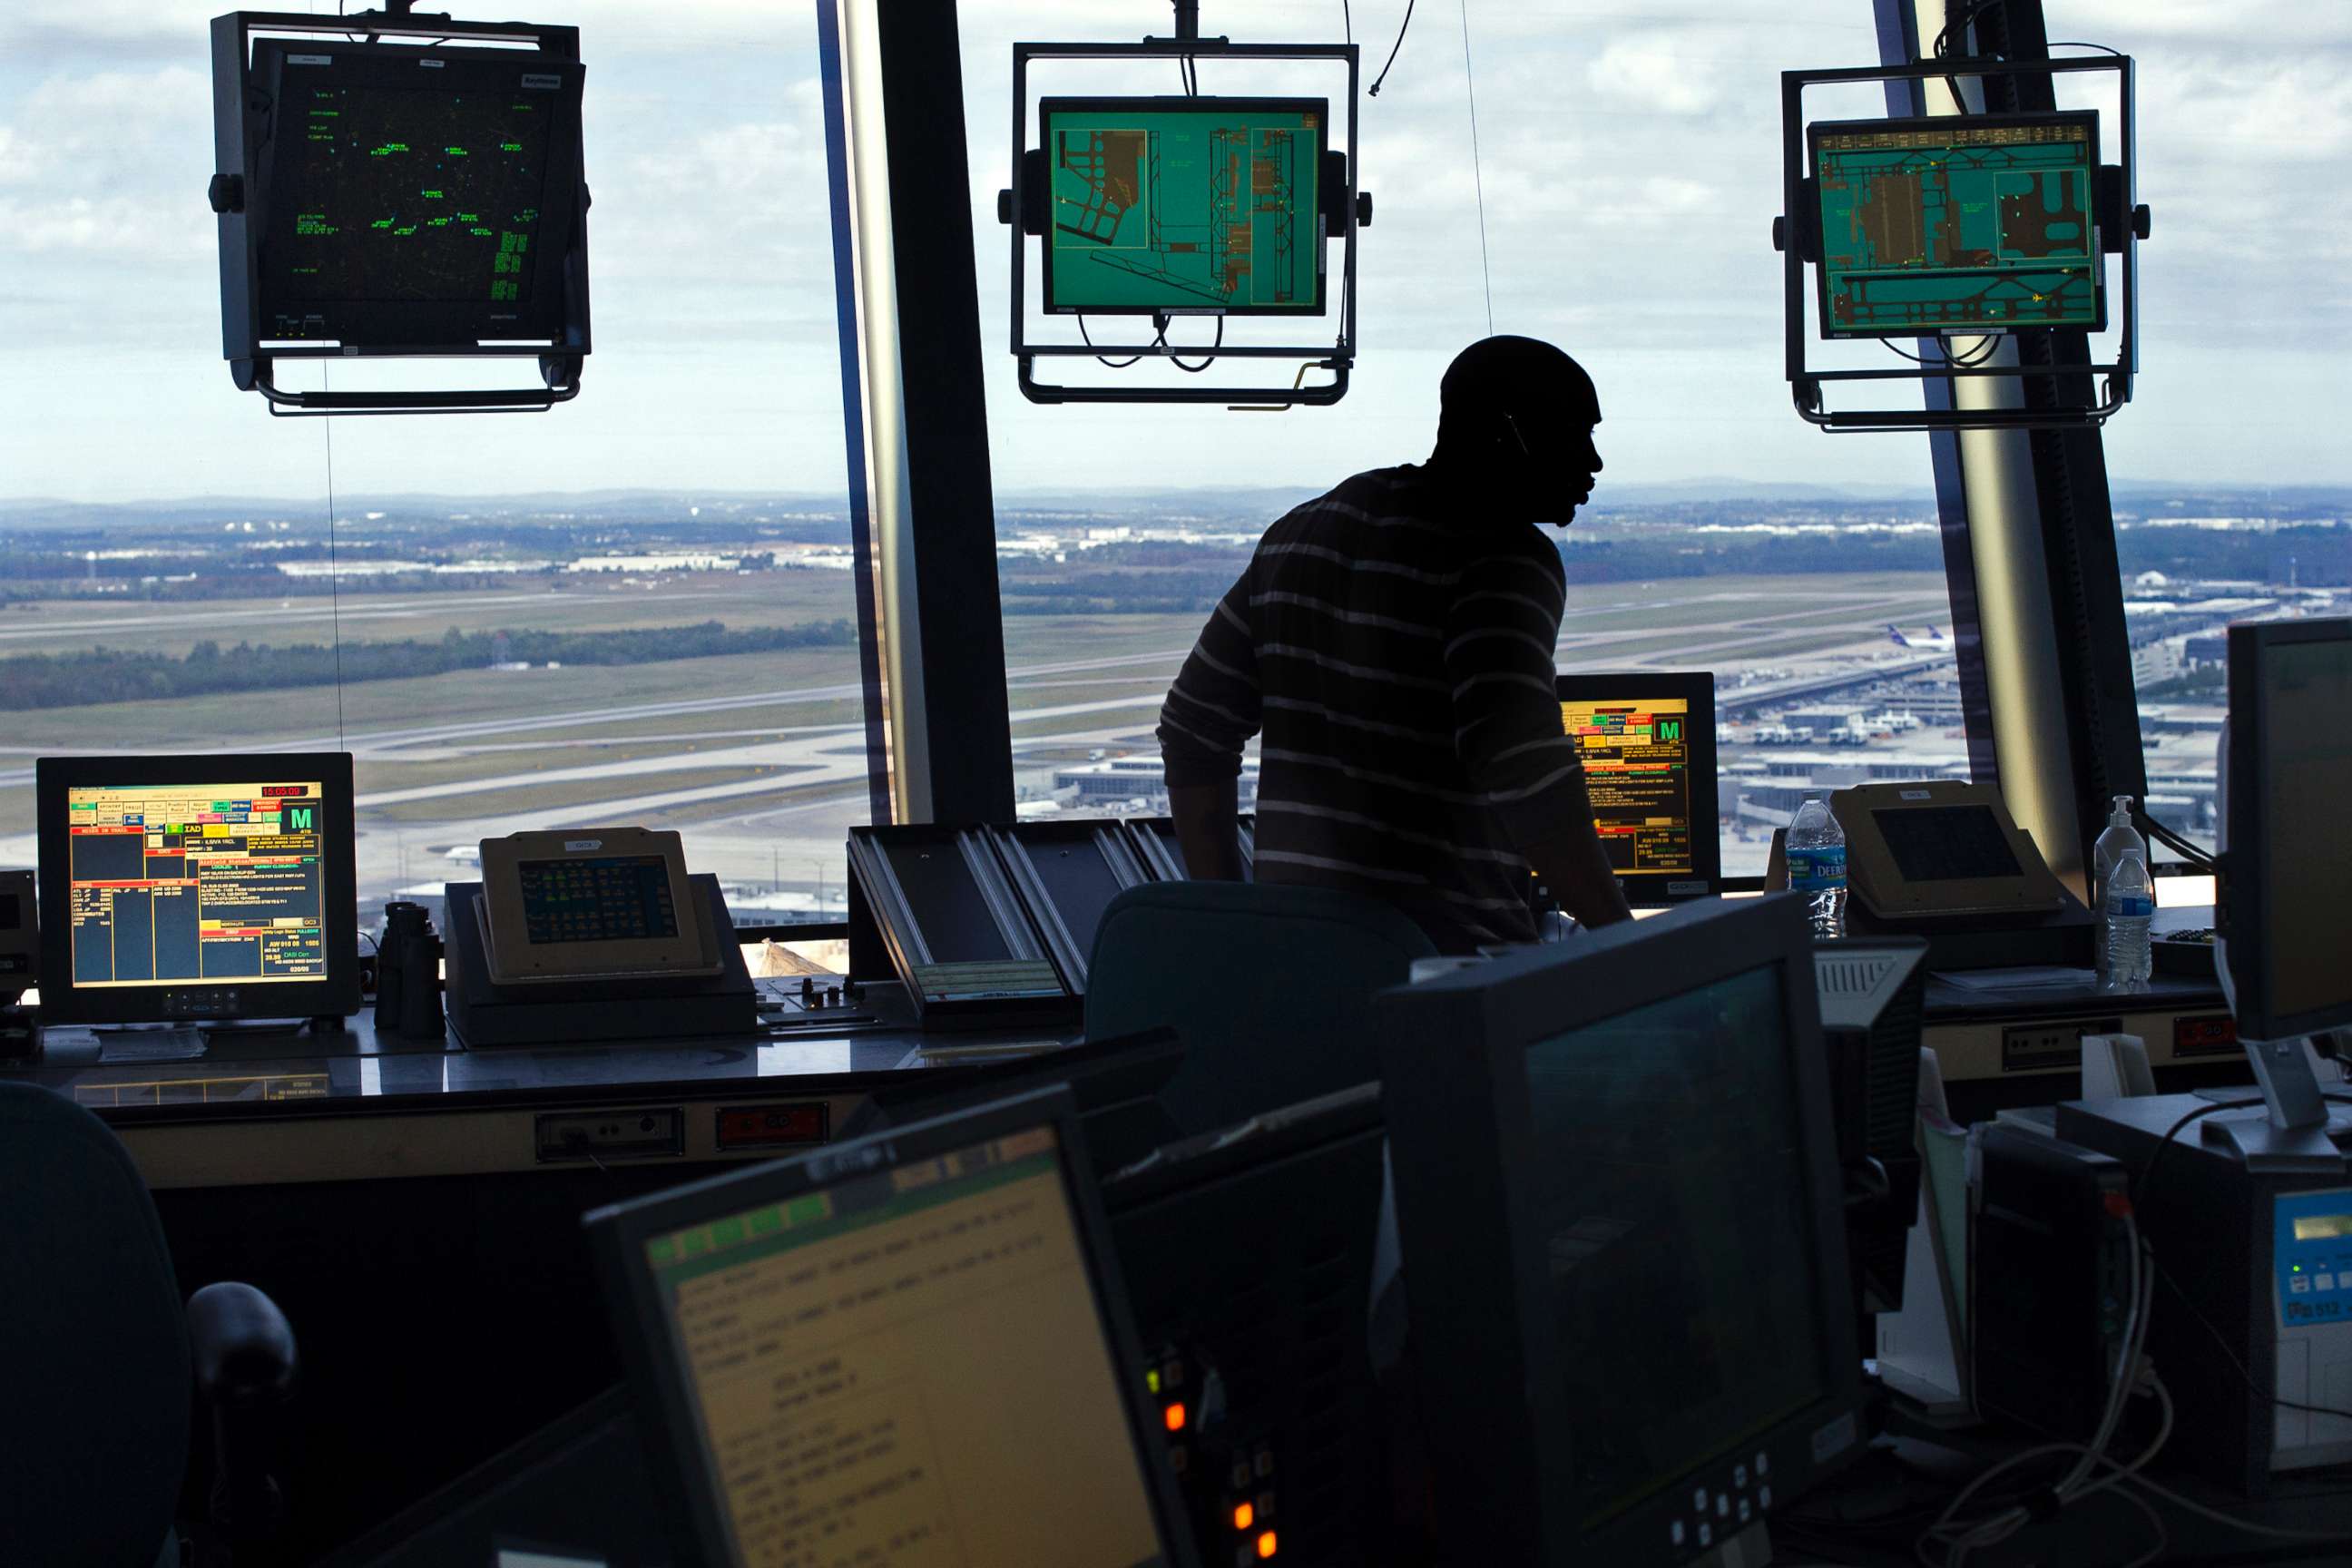 PHOTO: In this Sept. 27, 2016 file photo an FAA Air Traffic Controller works in the Dulles International Airport Air Traffic Control Tower in Sterling, Va., Sept. 27, 2016.